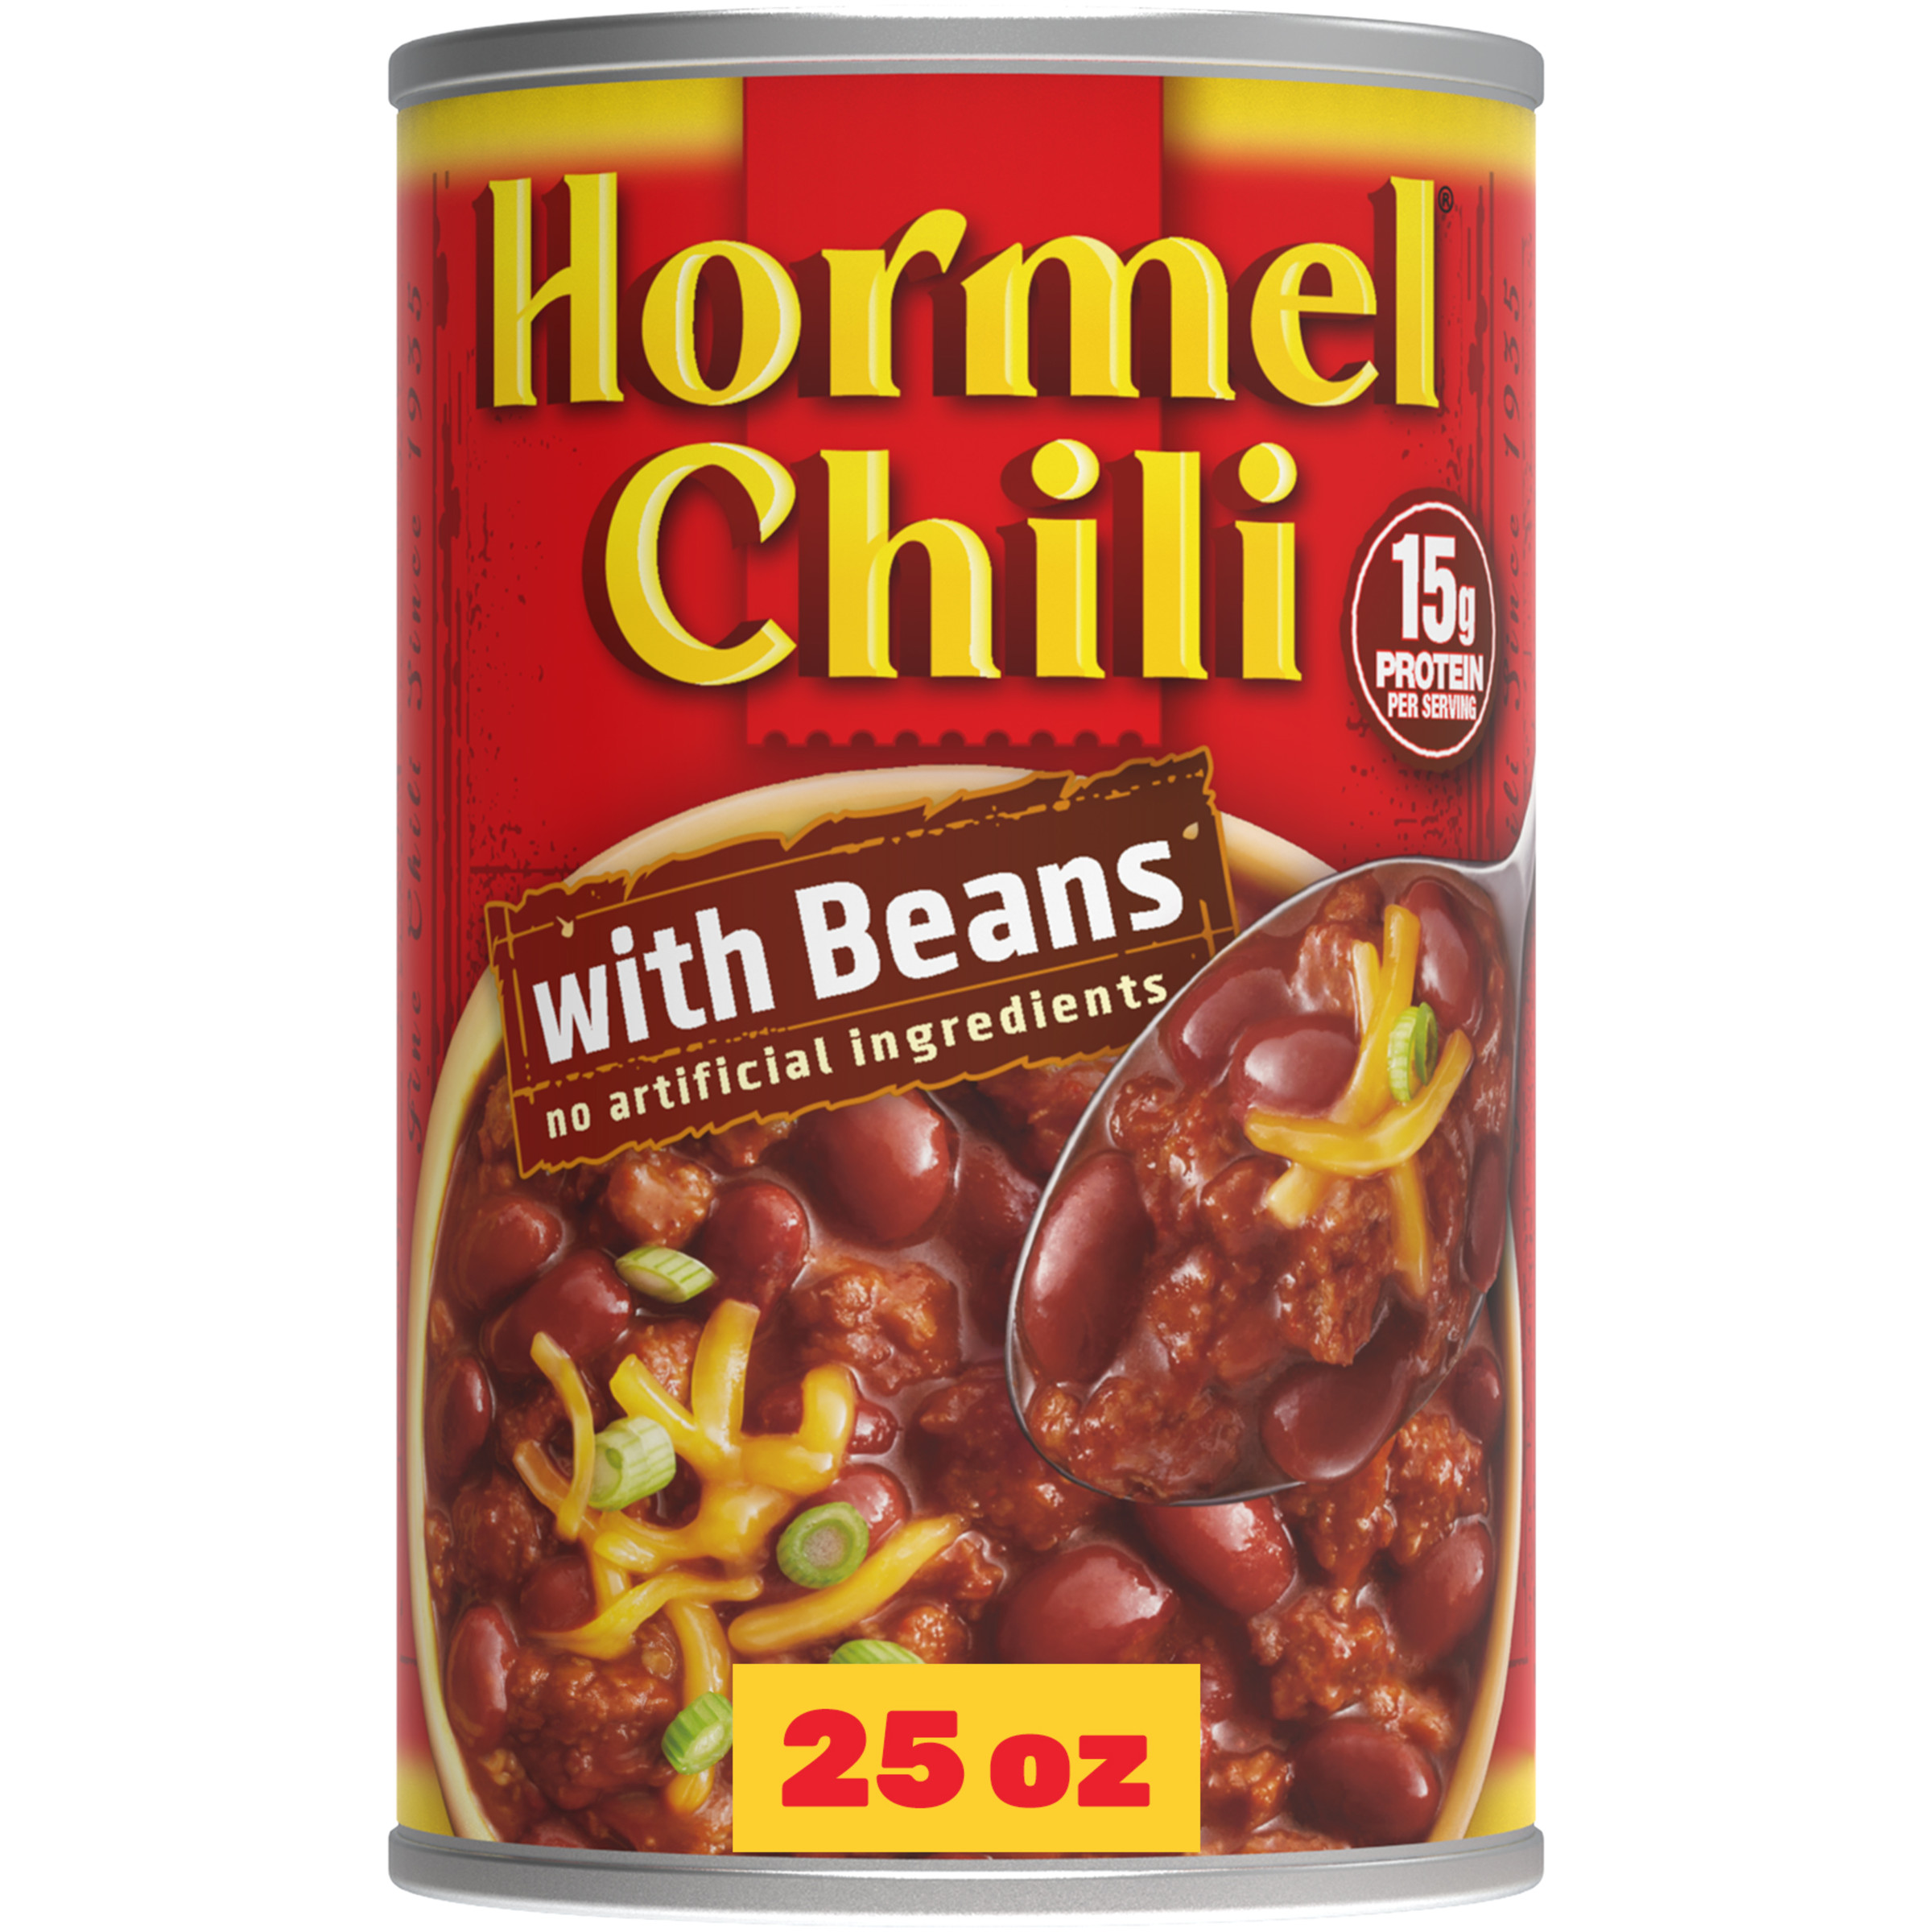 HORMEL Chili with Beans, No Artificial Ingredients, 25 oz Steel Can - image 1 of 19